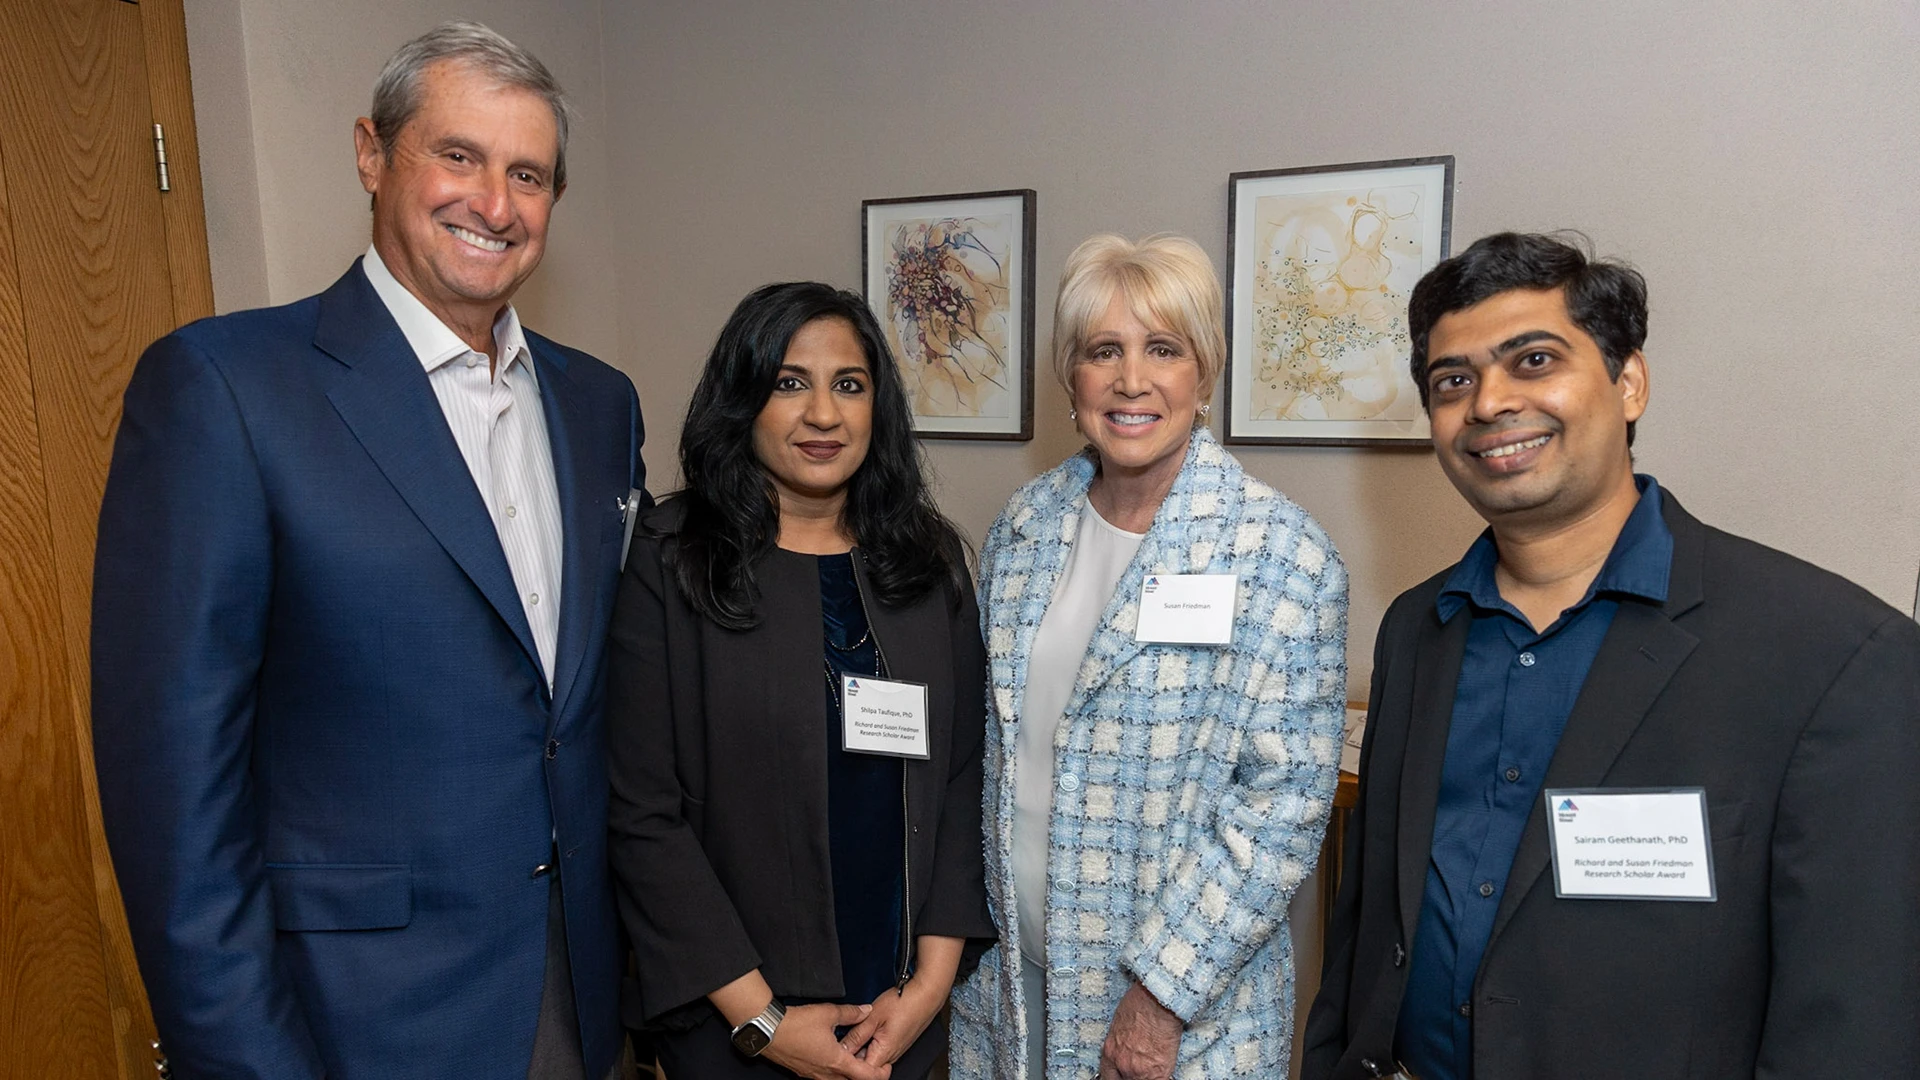 The 2023 recipients of the Richard and Susan Friedman Research Scholar Award are Shilpa R. Taufique, PhD, second from left, and Sairam Geethanath, PhD, right, for their research project on Accessible Community-Based Neuroimaging of Substance Use Disorder Patients to Monitor Therapeutic Efficacy. They are pictured with Richard A. Friedman and Susan Friedman. 